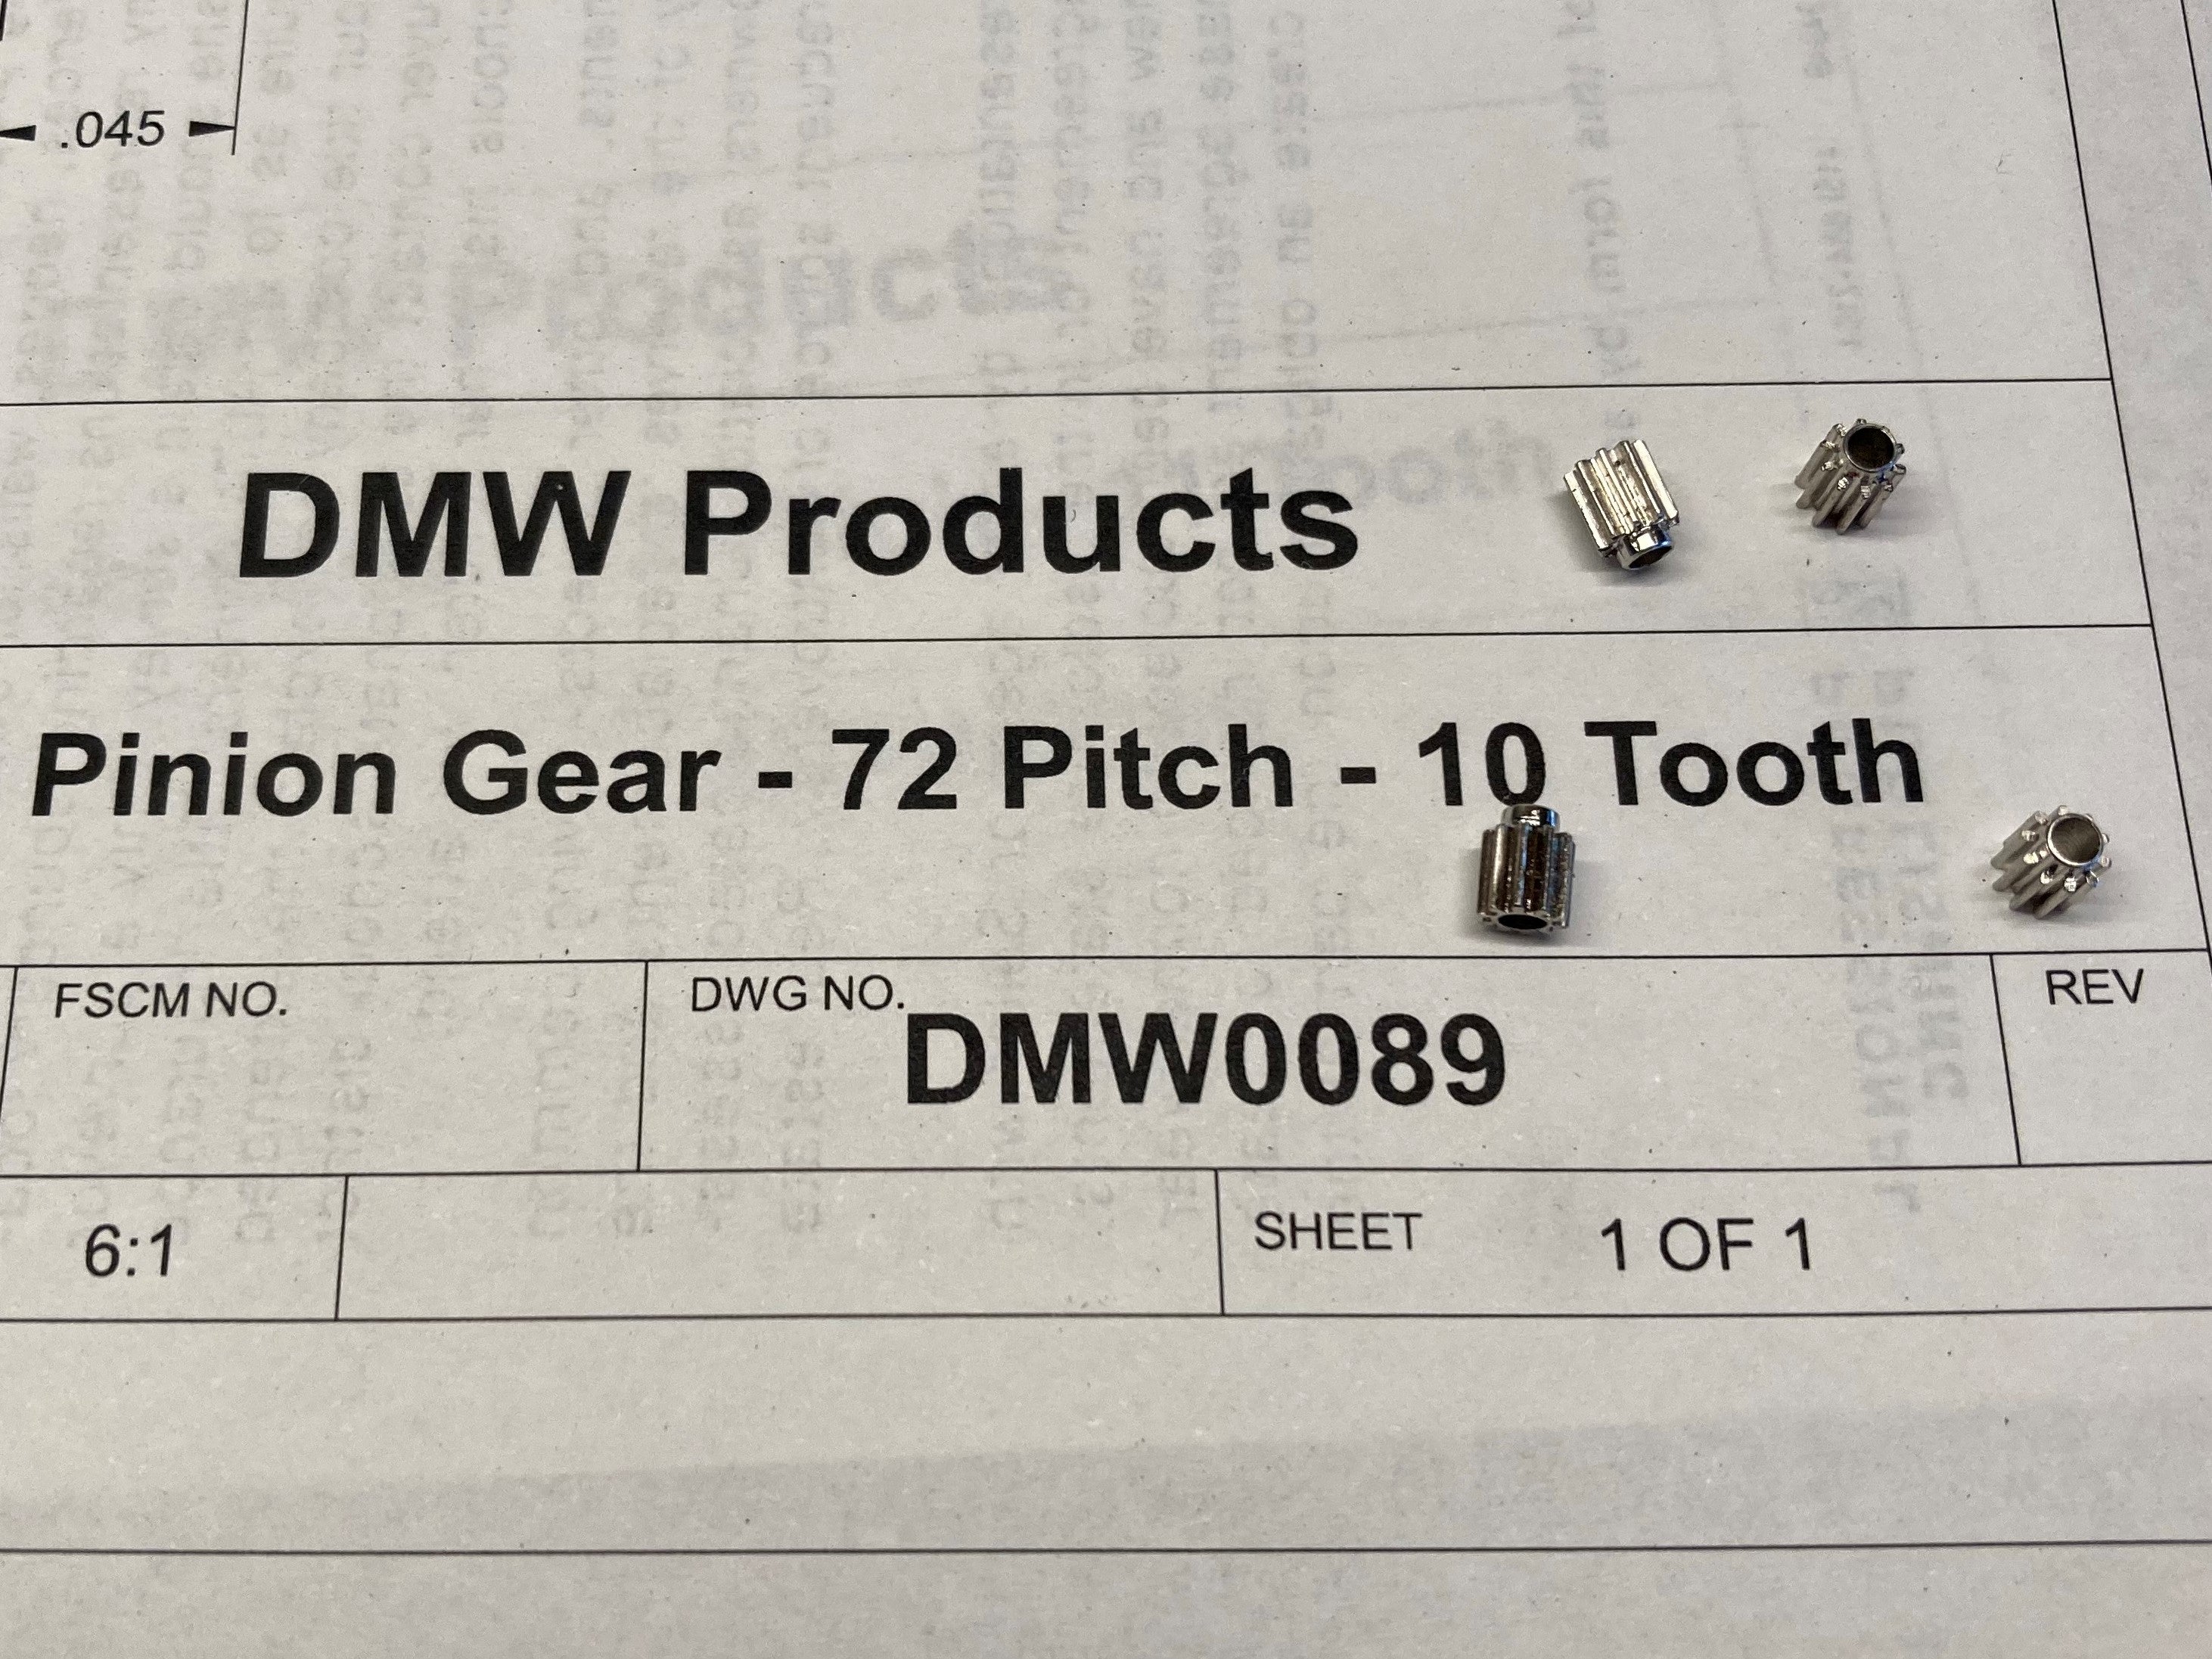 Pinion Gear - 72 Pitch - 10 Tooth - One each